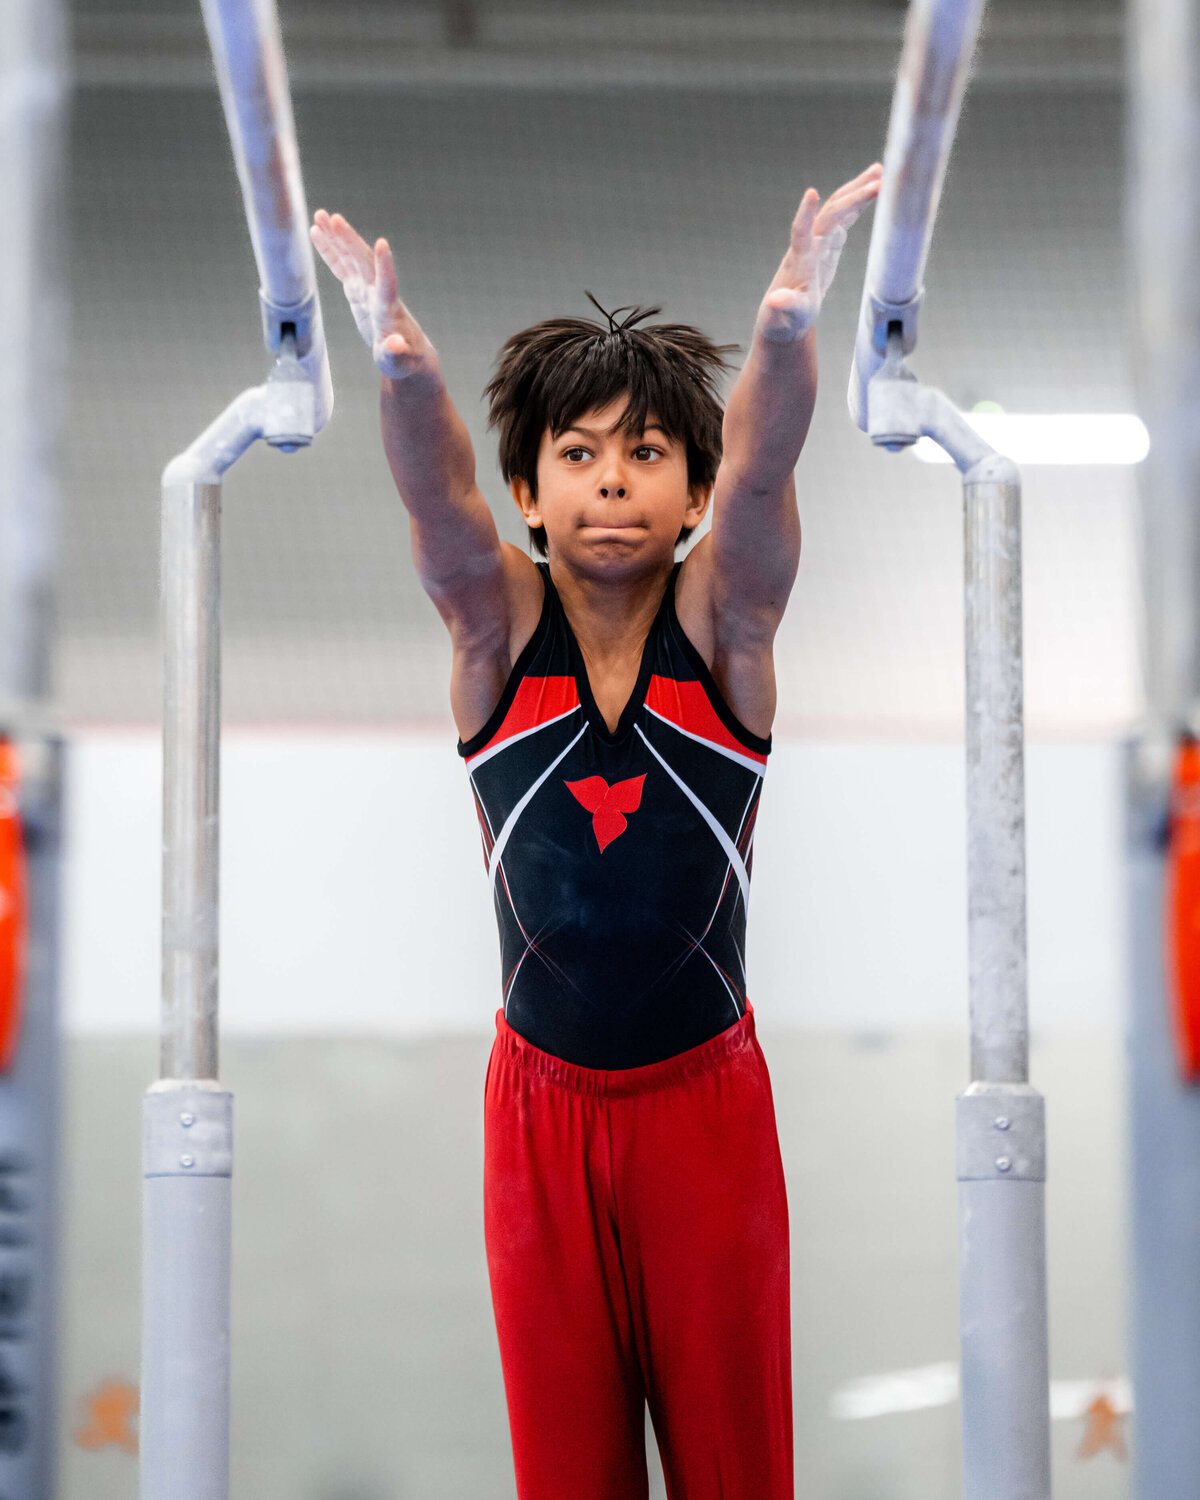 Photo by Luke O'Geil taken at the 2023 inaugural Grizzly Classic men's artistic gymnastics competitionA1_01280